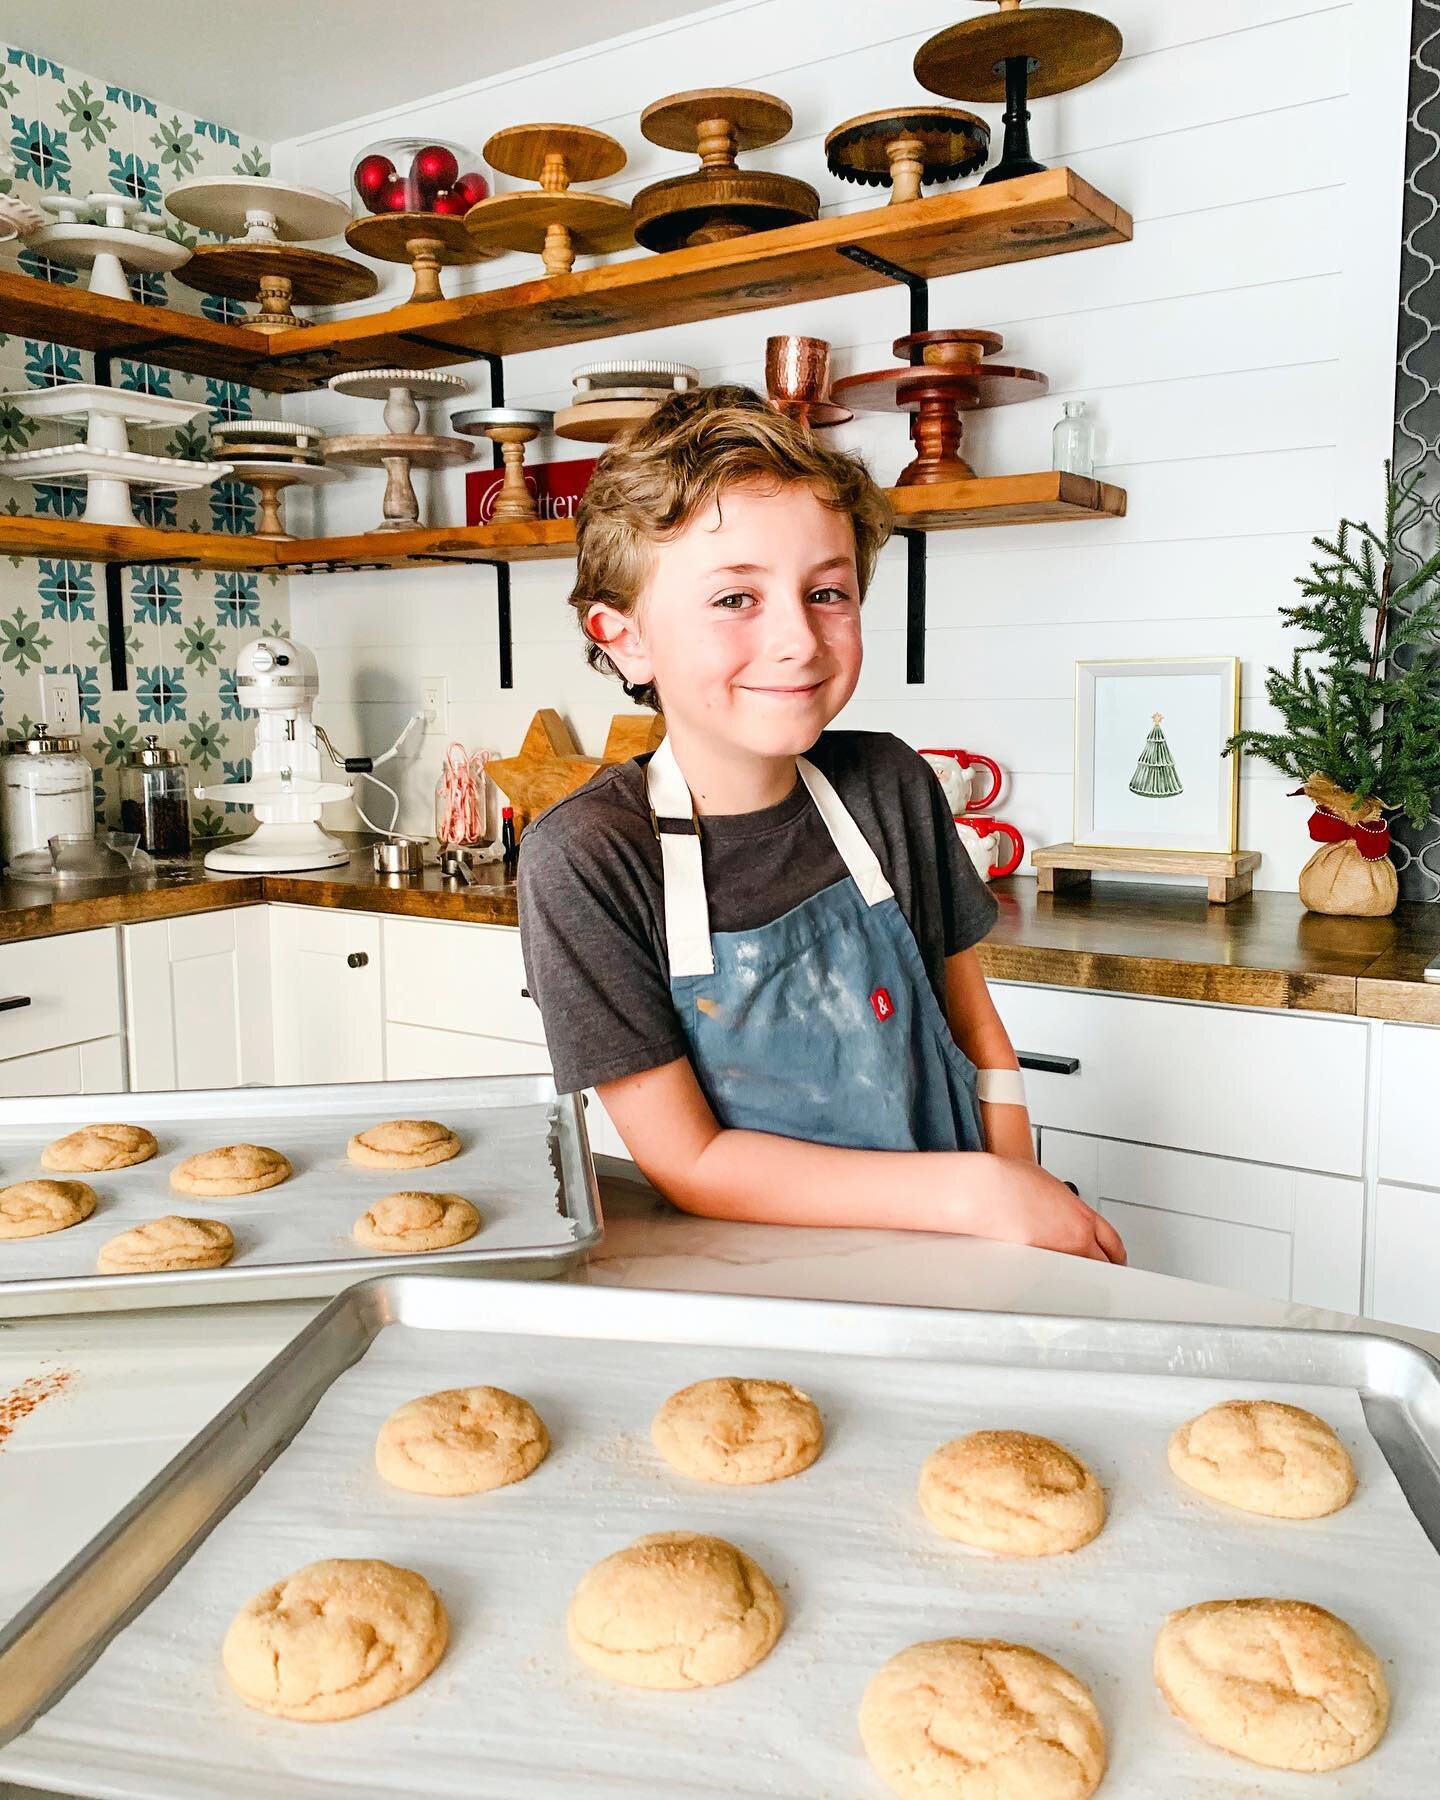 Dear Santa, I can explain&hellip; 🎄

He may look sweet, and he makes a mean snickerdoodle, but don&rsquo;t be fooled. He watches Home Alone and takes notes. 

Soren was by my side while I perfected my Brown Butter Snickerdoodle recipe for WILD SUGAR